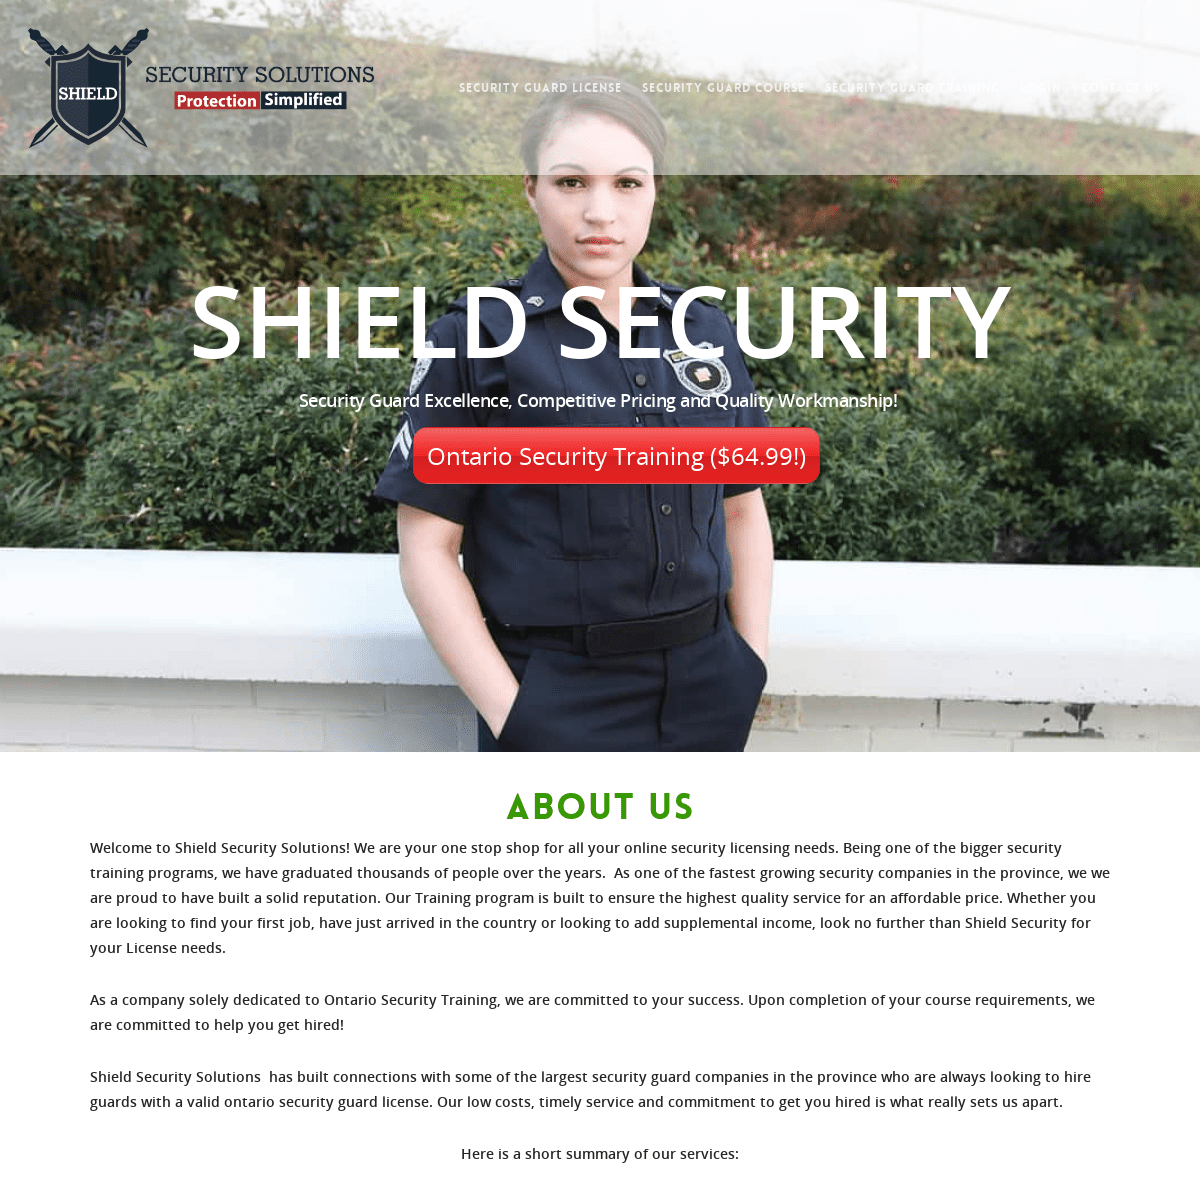 A complete backup of https://shieldsecuritysolutions.ca